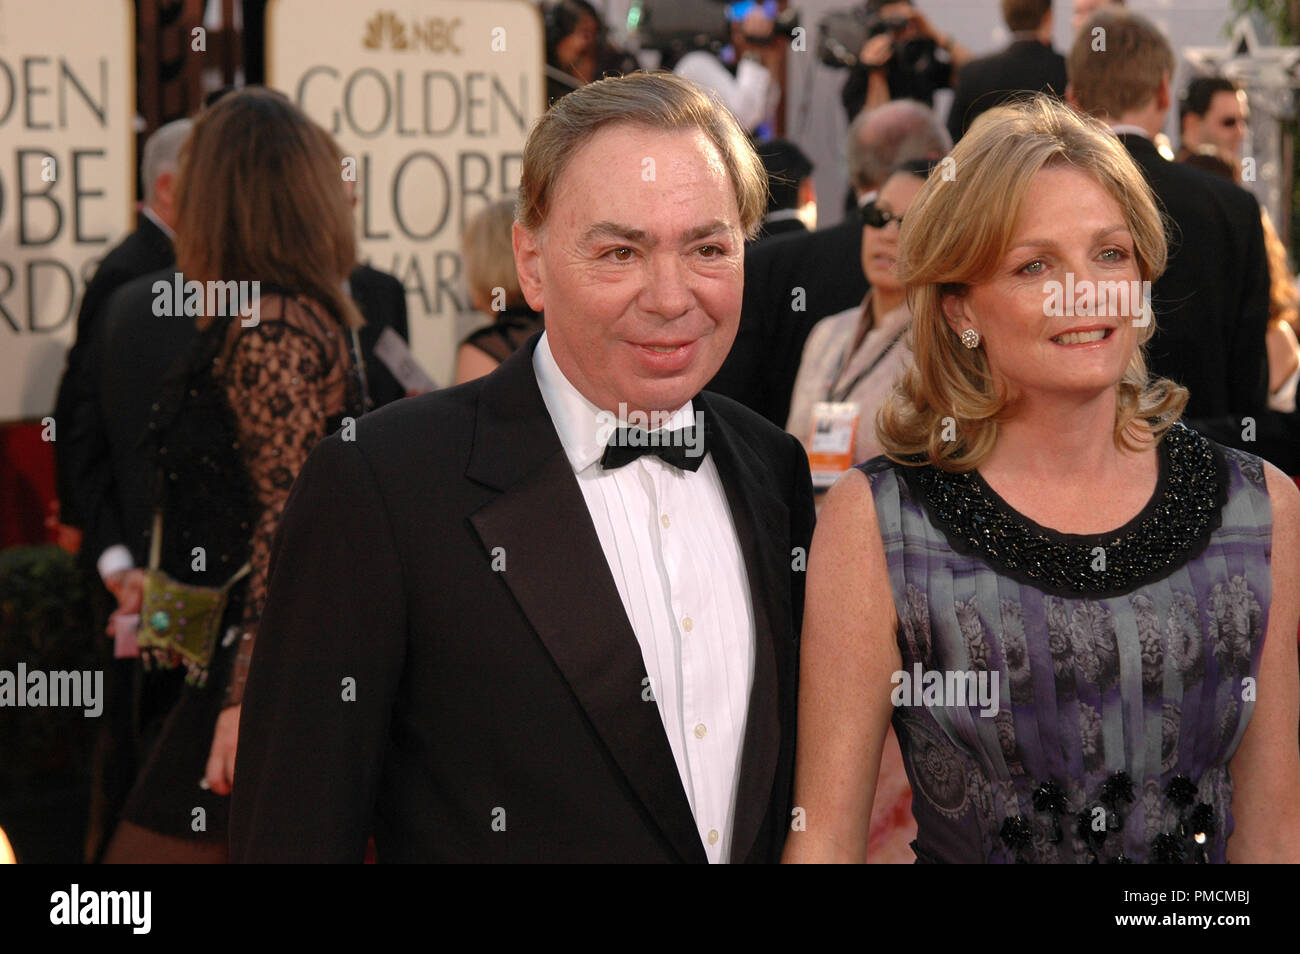 Arrivals at the  'Golden Globe Awards - 62nd Annual' Andrew Lloyd Webber 1-16-2005  File Reference # 1080 061PLX  For Editorial Use Only - Stock Photo